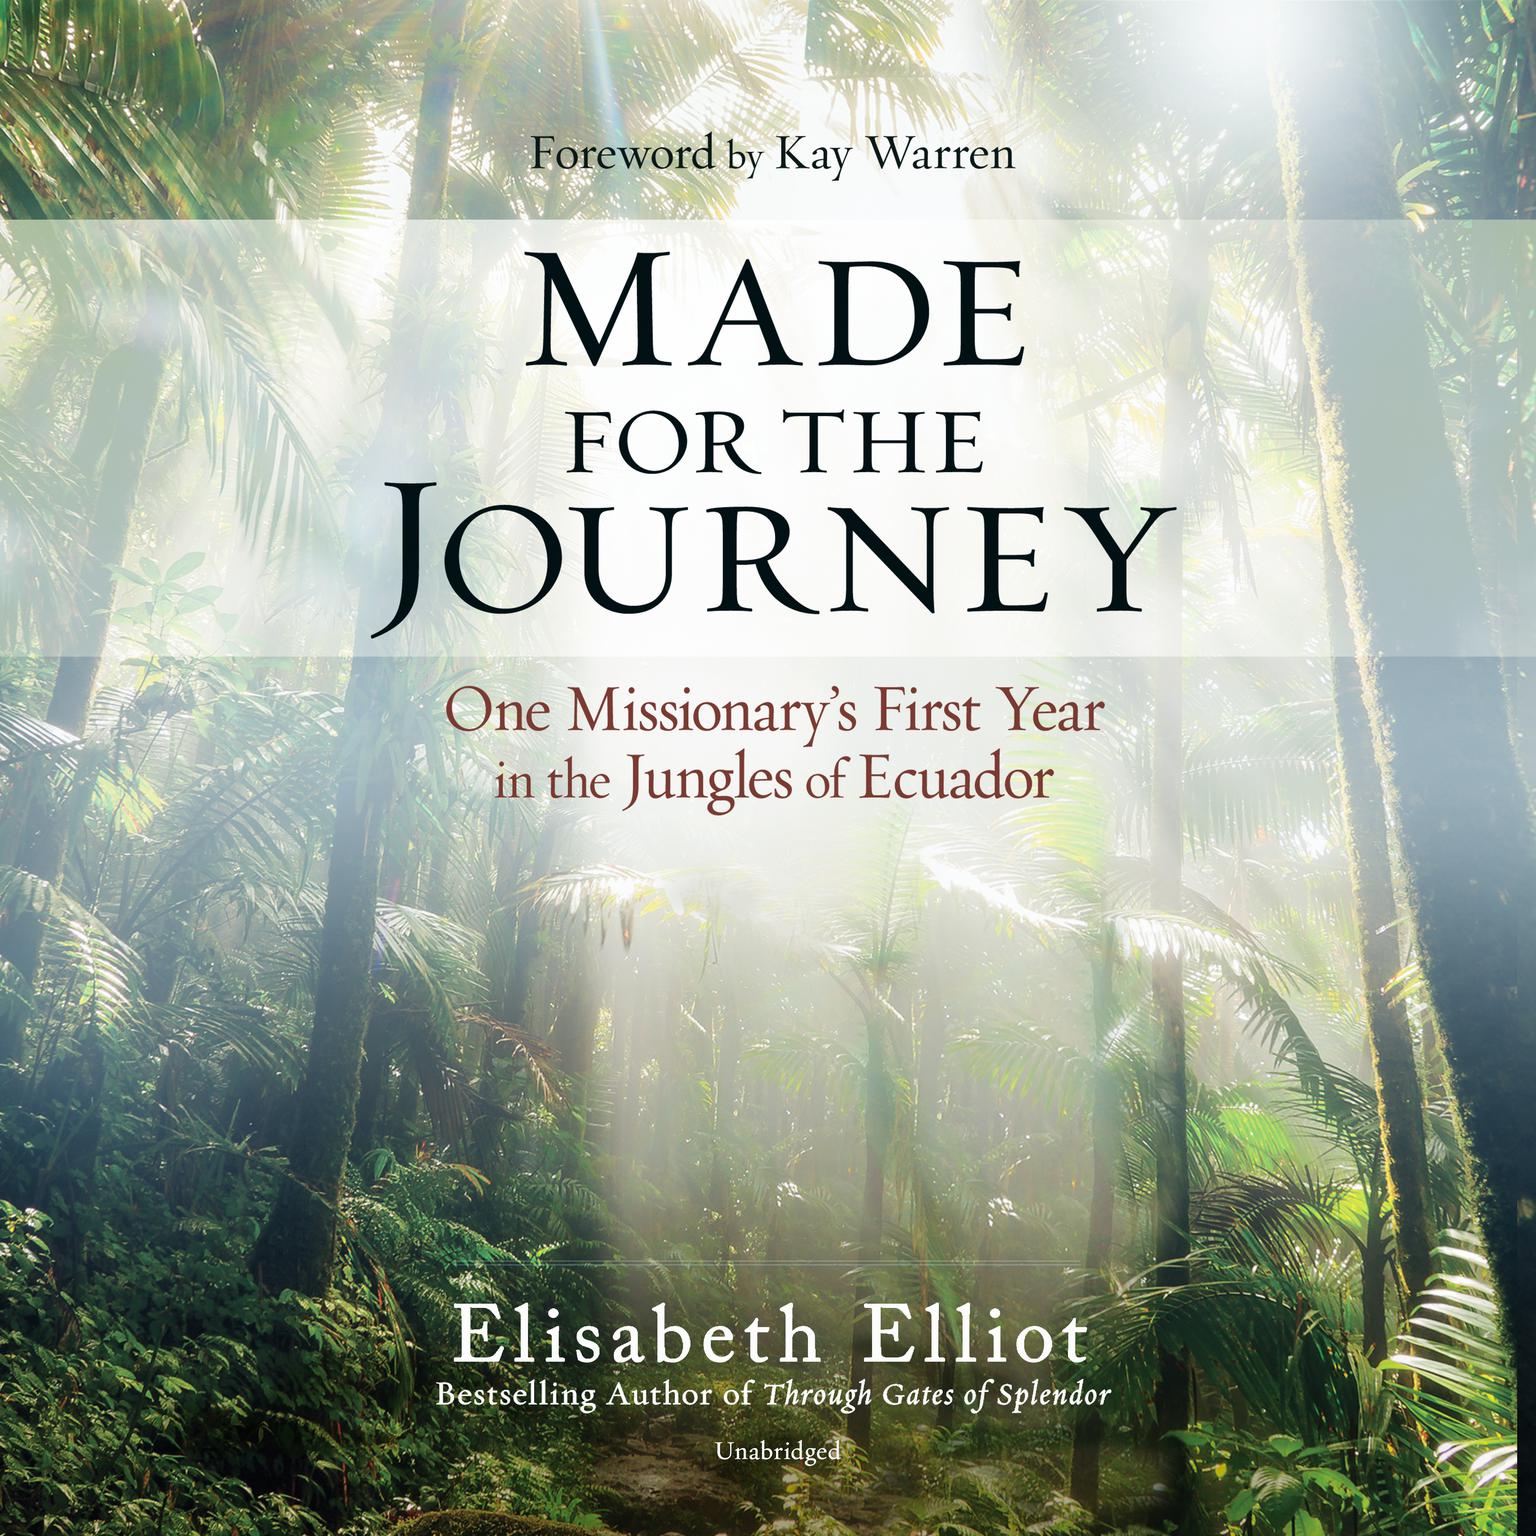 Made for the Journey: One Missionary’s First Year in the Jungles of Ecuador Audiobook, by Elisabeth Elliot